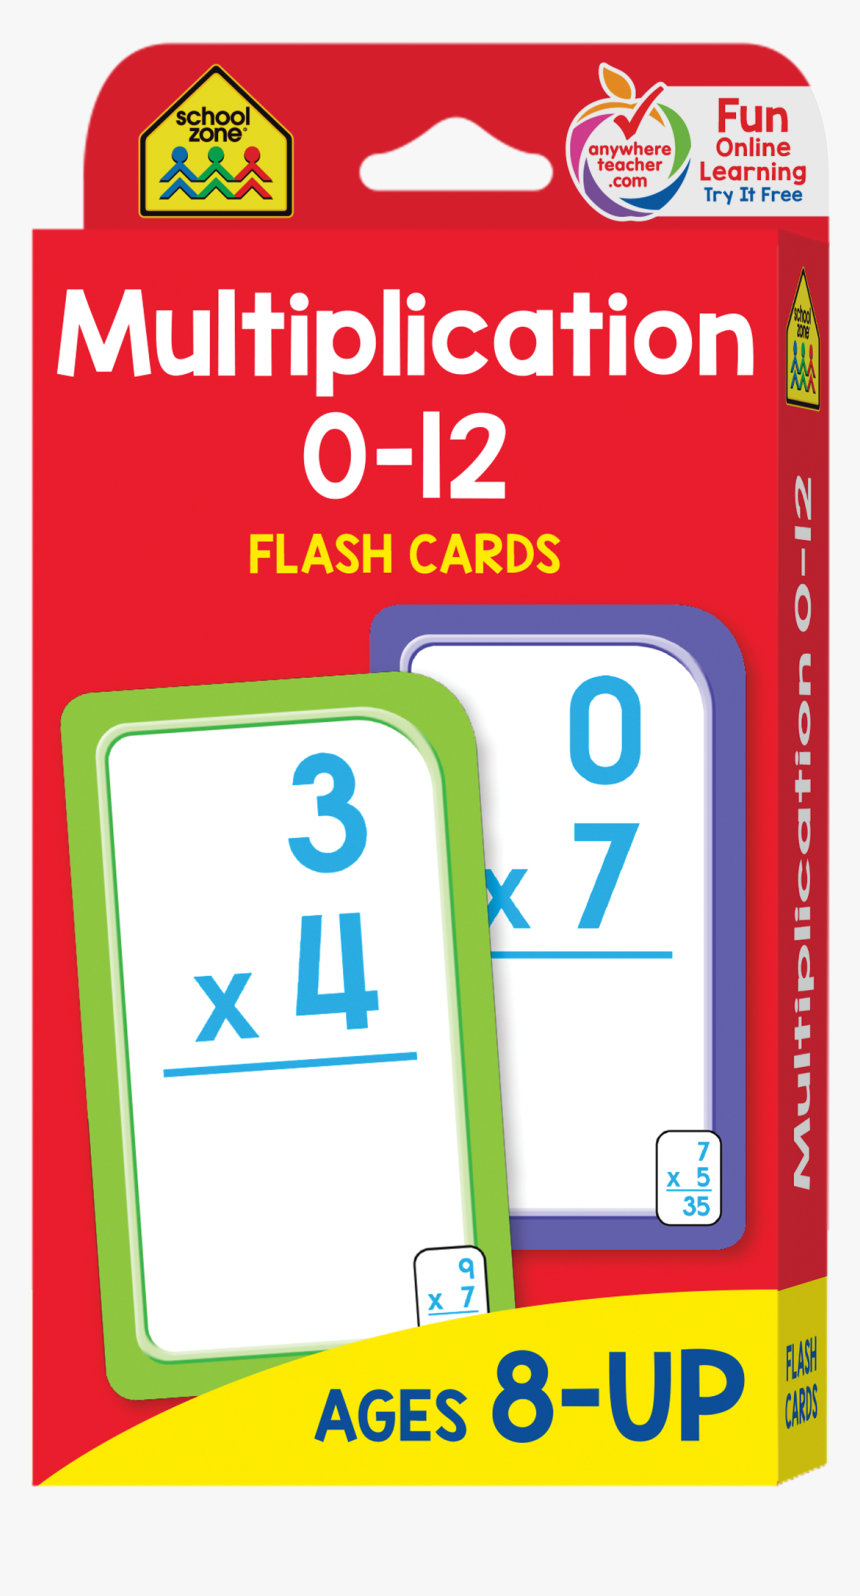 Multiplication 0-12 Flash Cards Will Make Math More